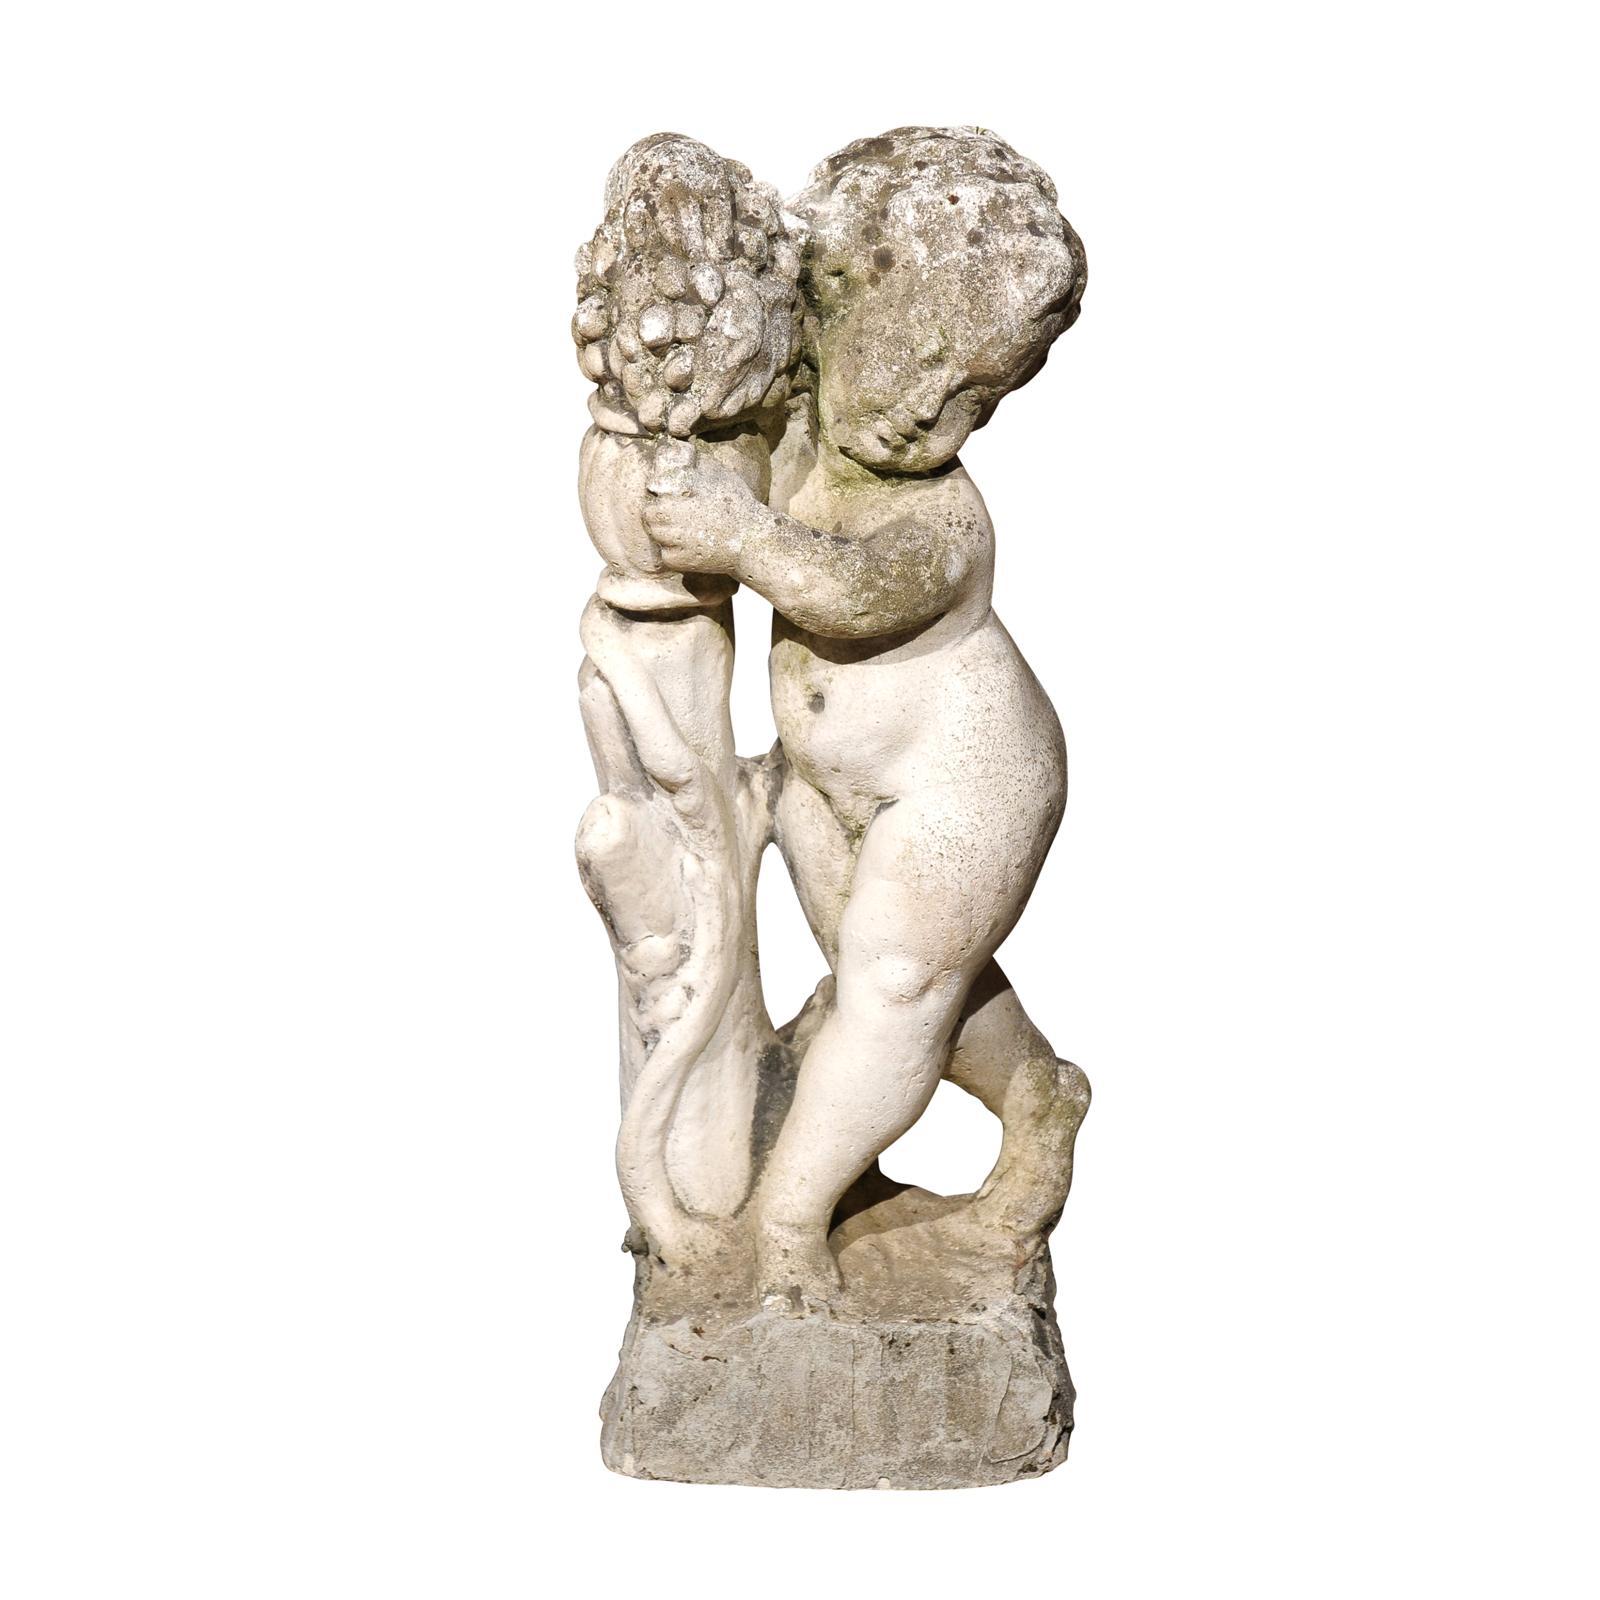 French Carved Stone Putti Sculpture with Grapes from the Mid 20th Century For Sale